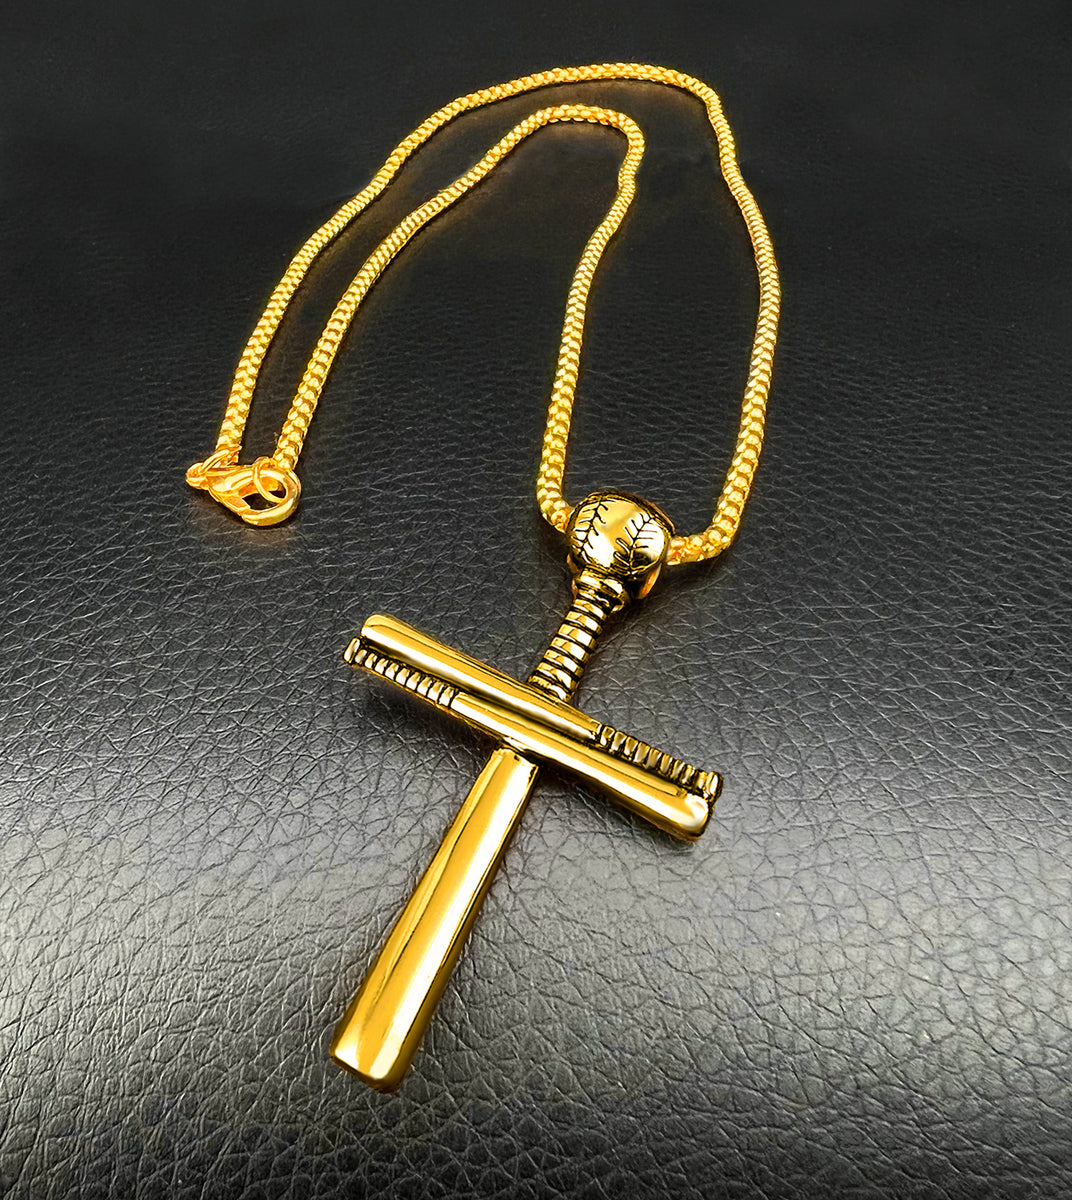 Mini Fede Studded Cross Charm in 18K Yellow Gold / Dolce Amore